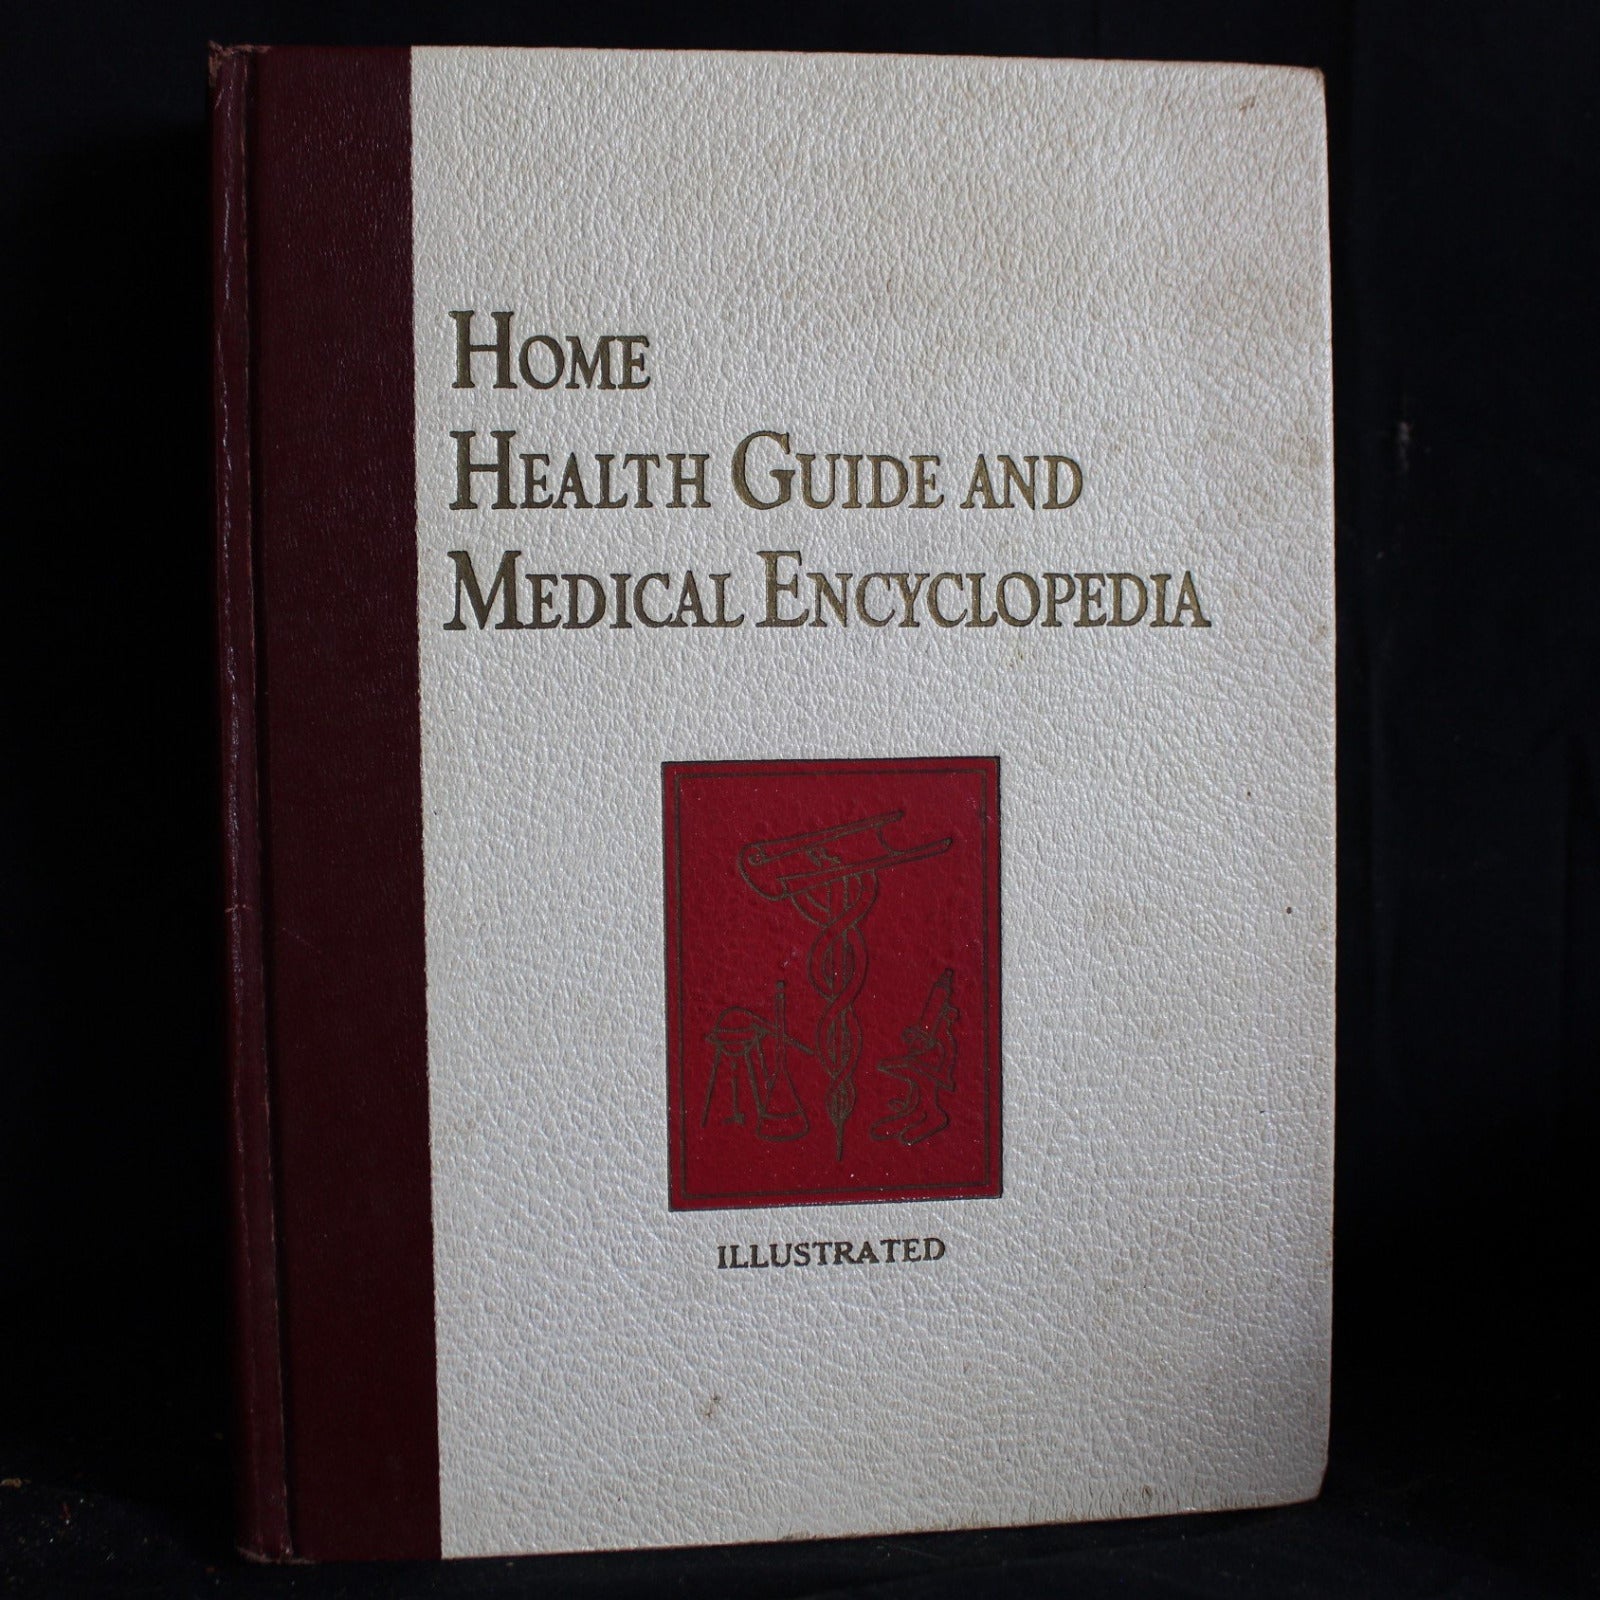 Hardcover Vintage Midcentury Home Health Guide & Medical Encyclopedia Illustrated by Parents Magazine, 1960